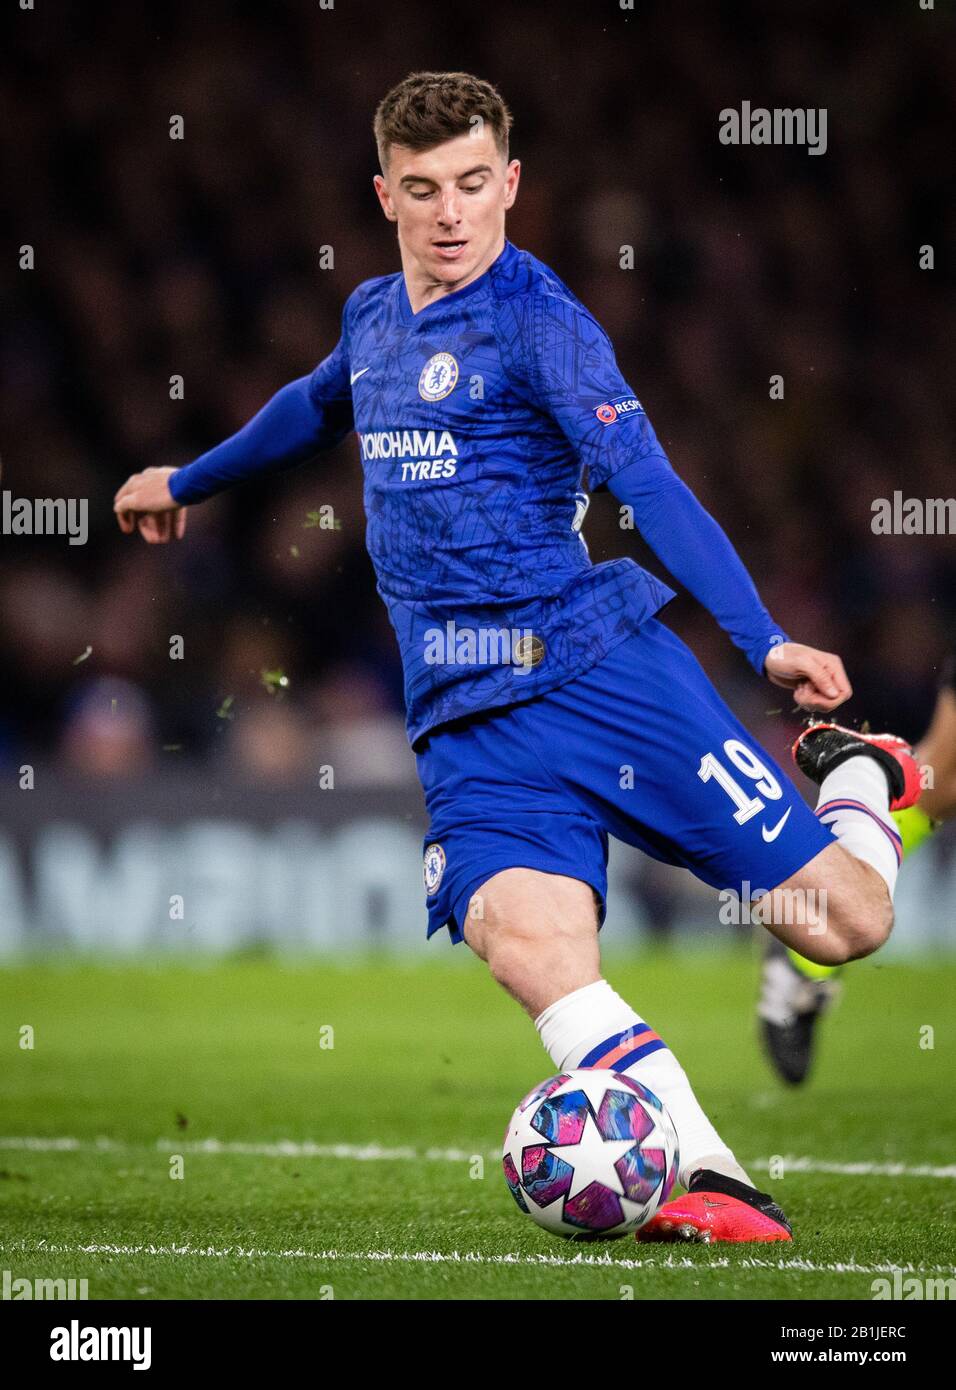 London, 25.02.2020 Mason Mount (Chelsea) Chelsea London - FC Bayern München  DFL regulations prohibit any use of photographs as image sequences and/or Stock Photo